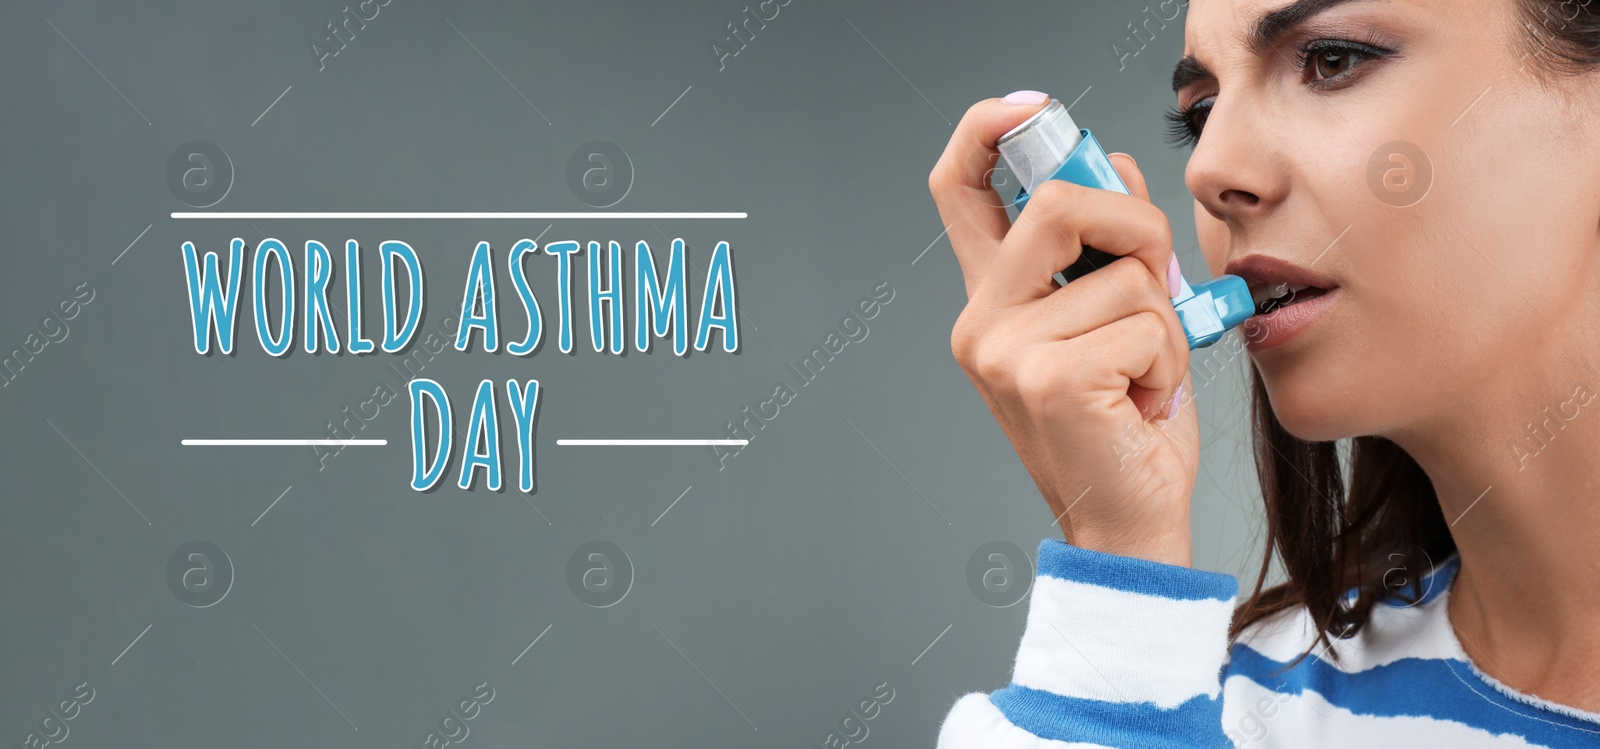 Image of World asthma day. Young woman using inhaler on grey background, banner design